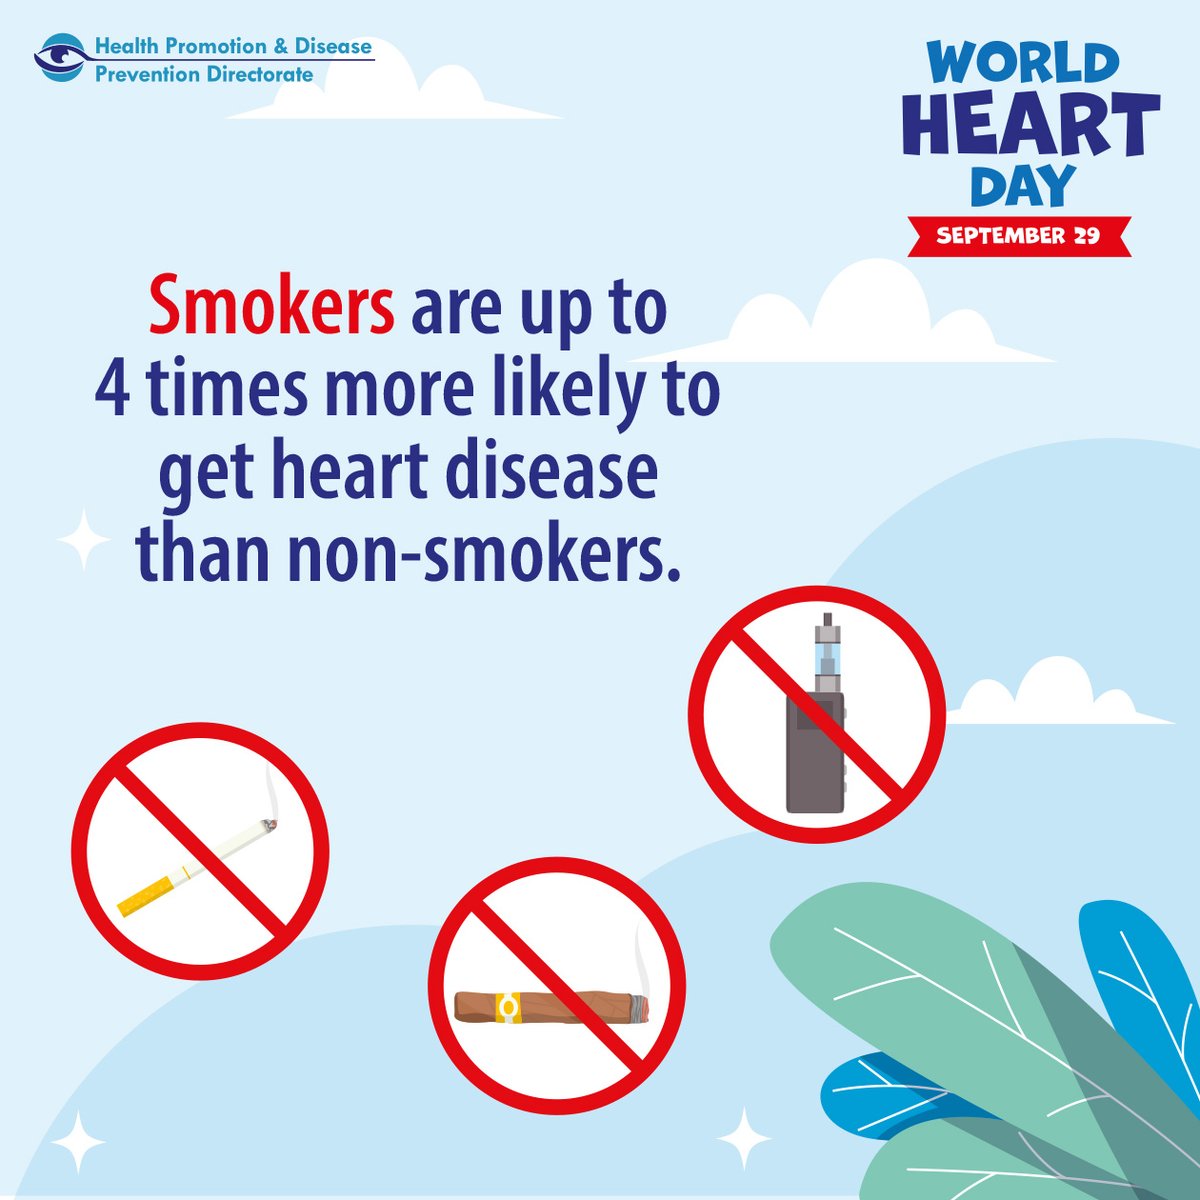 We can help you stop smoking! Phone our free Quitline today on 8007 3333 #WorldHeartDay #HPDP